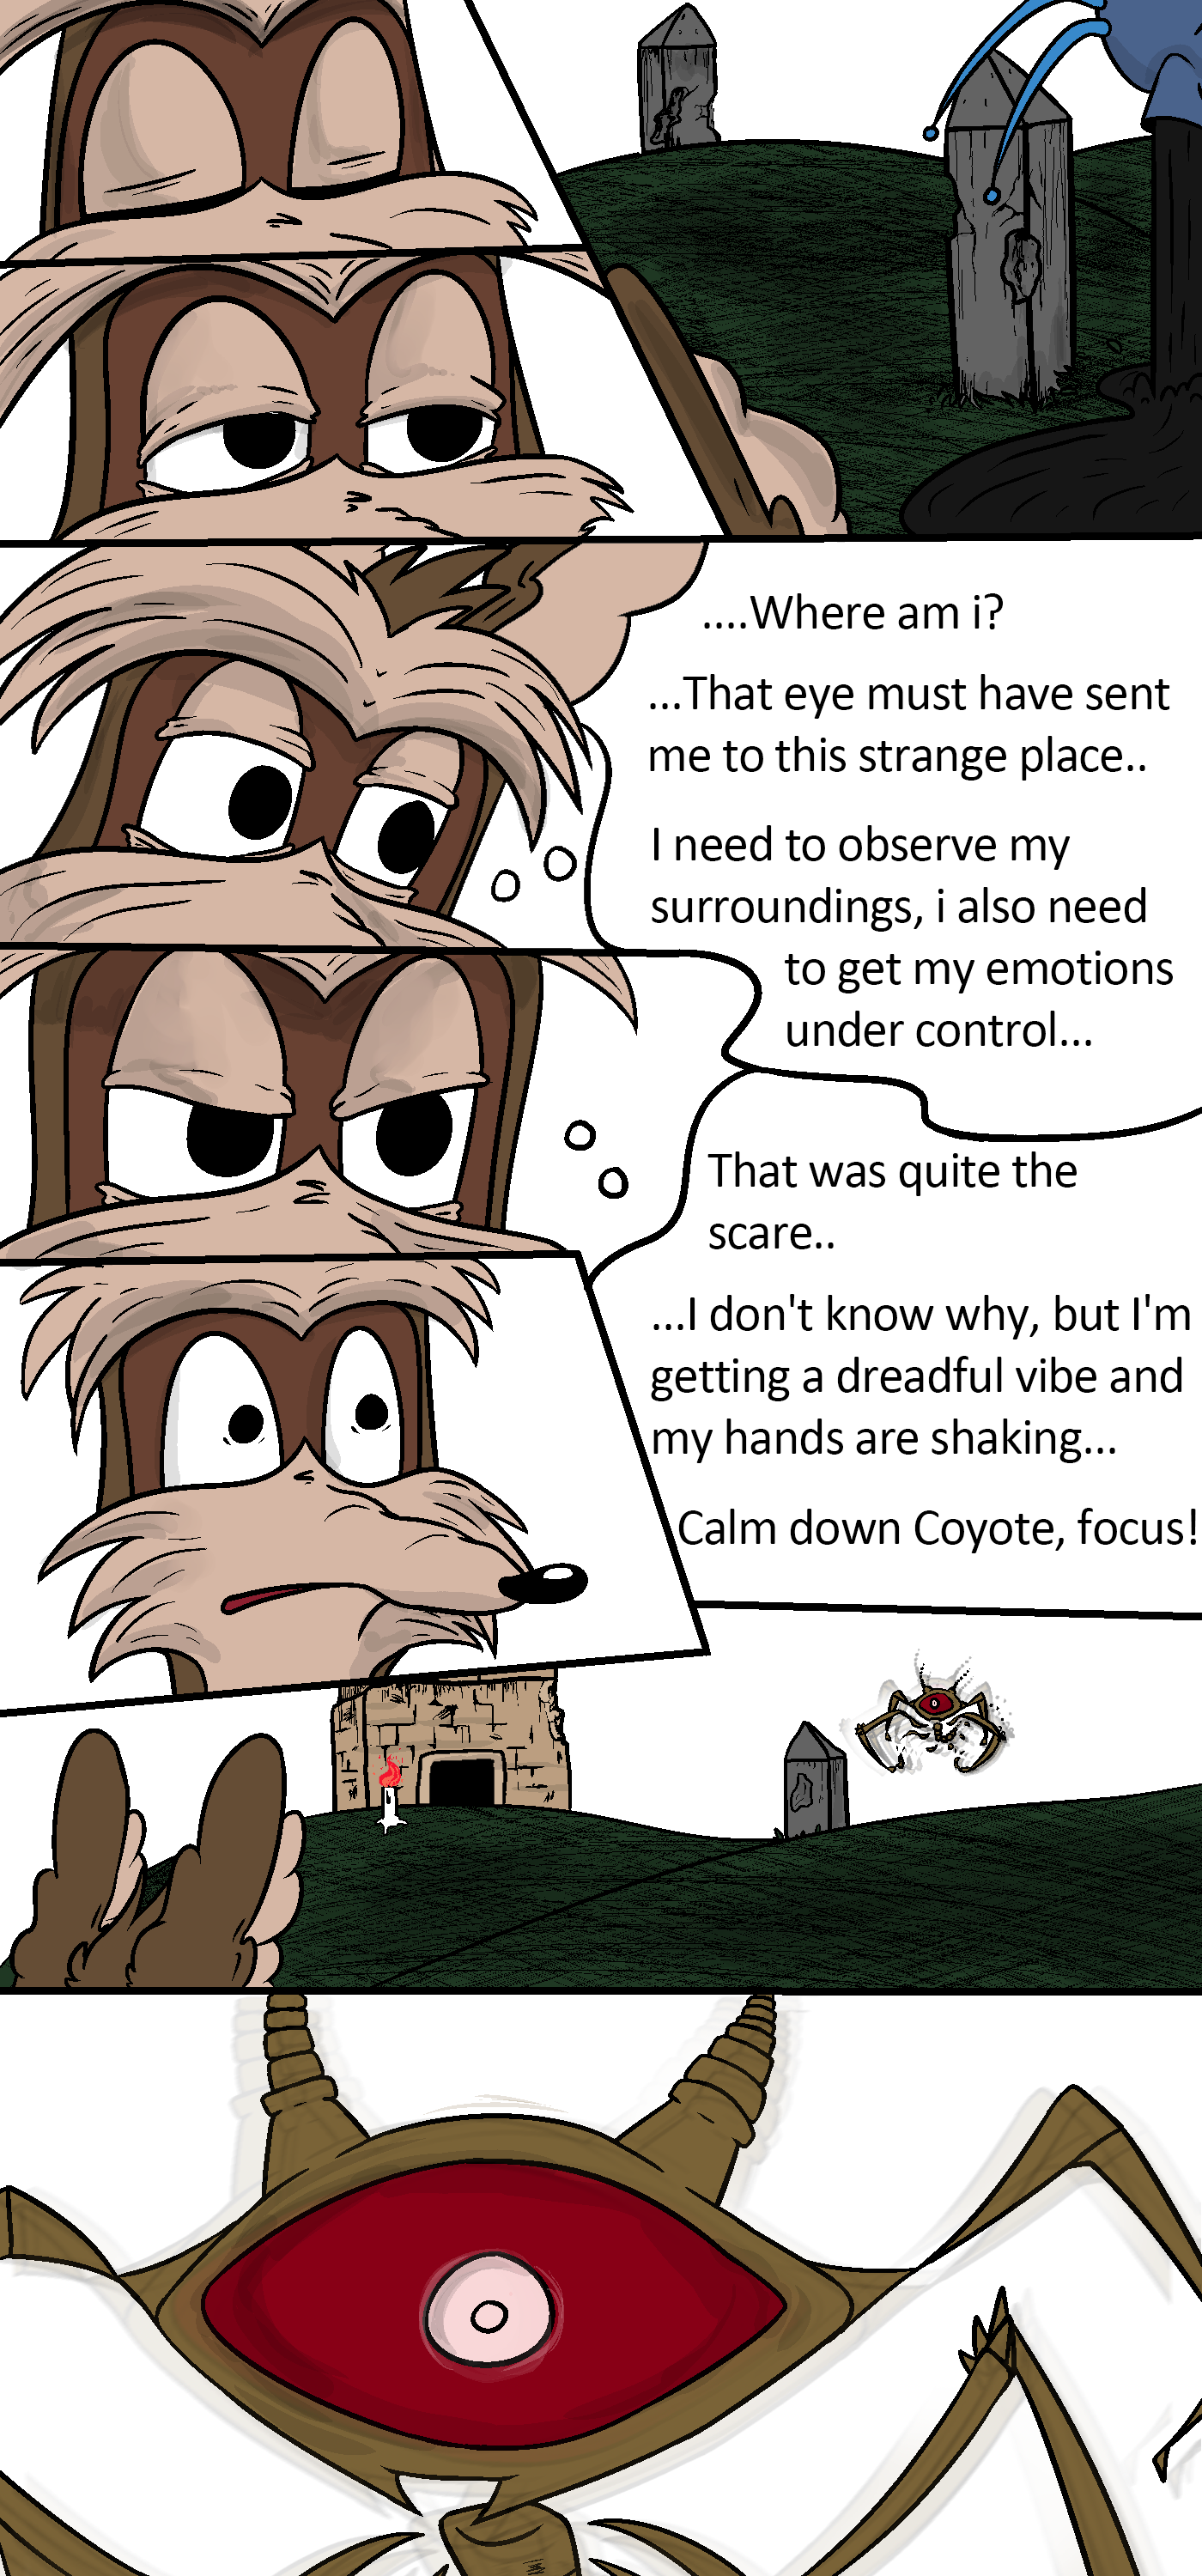 ch23/pg1.png. If you're seeing this, enable images. Or, perhaps we have a website issue. Try refreshing, if unsuccessful email commodorian@tailsgetstrolled.org with a detailed description of how you got here.